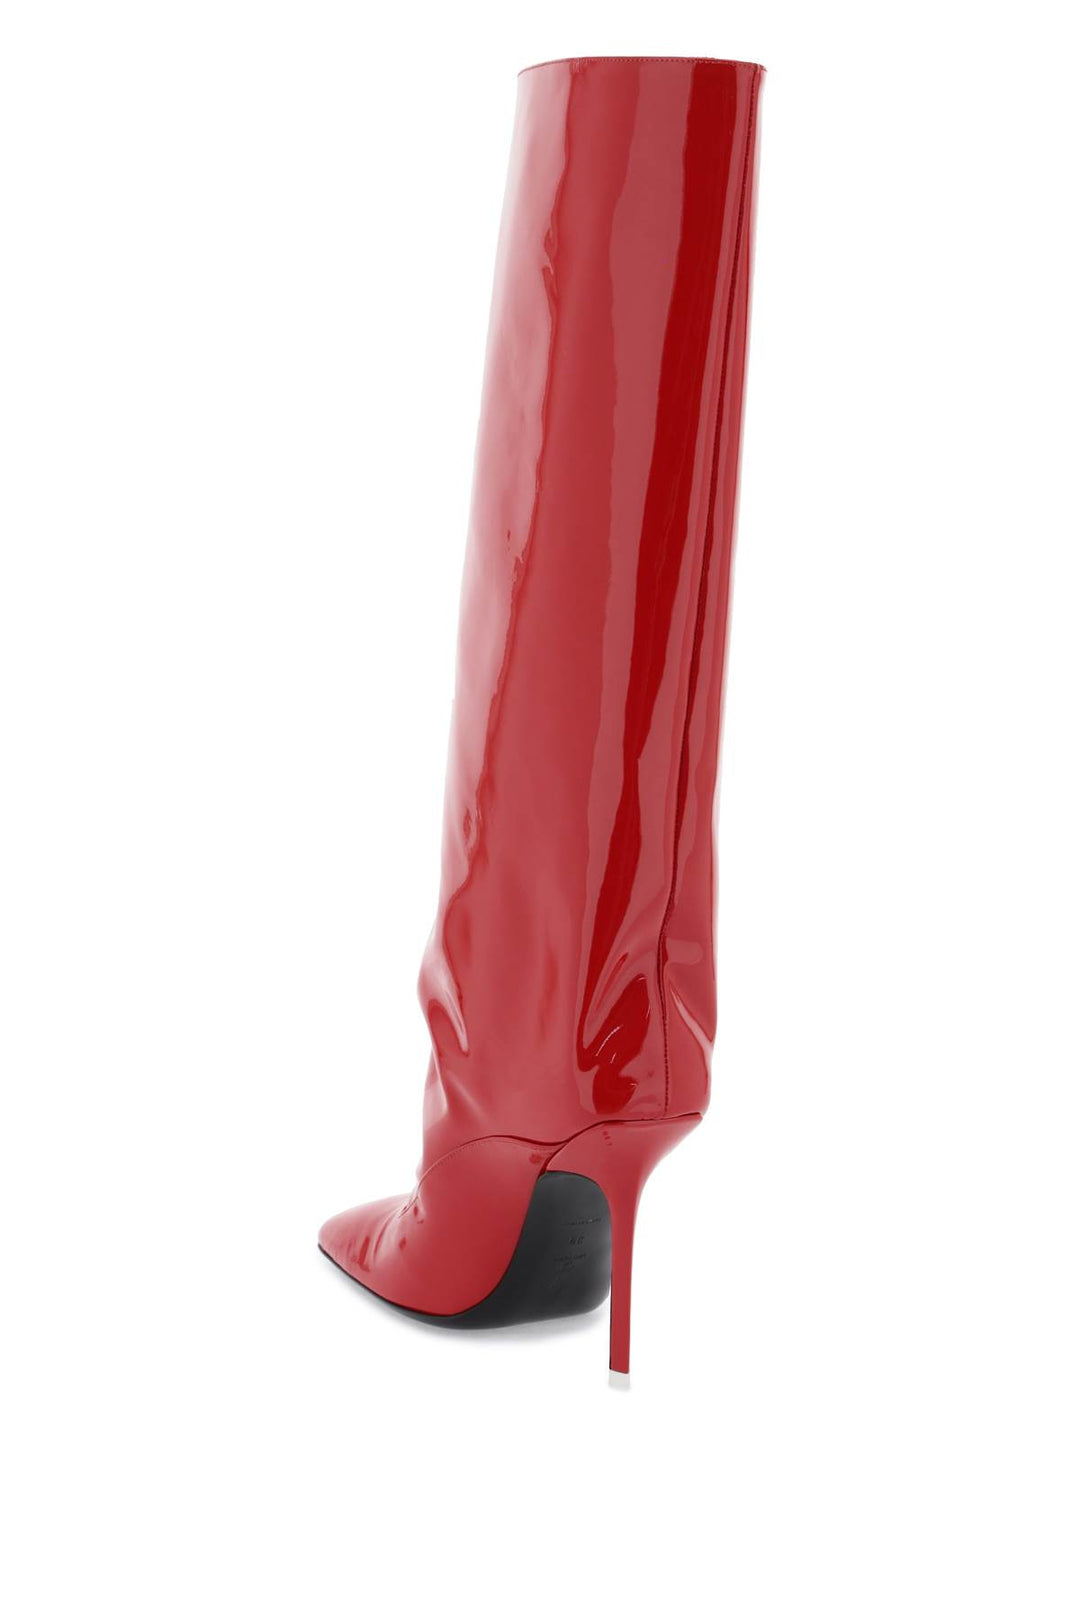 The Attico Sienna Tube Boots   Red